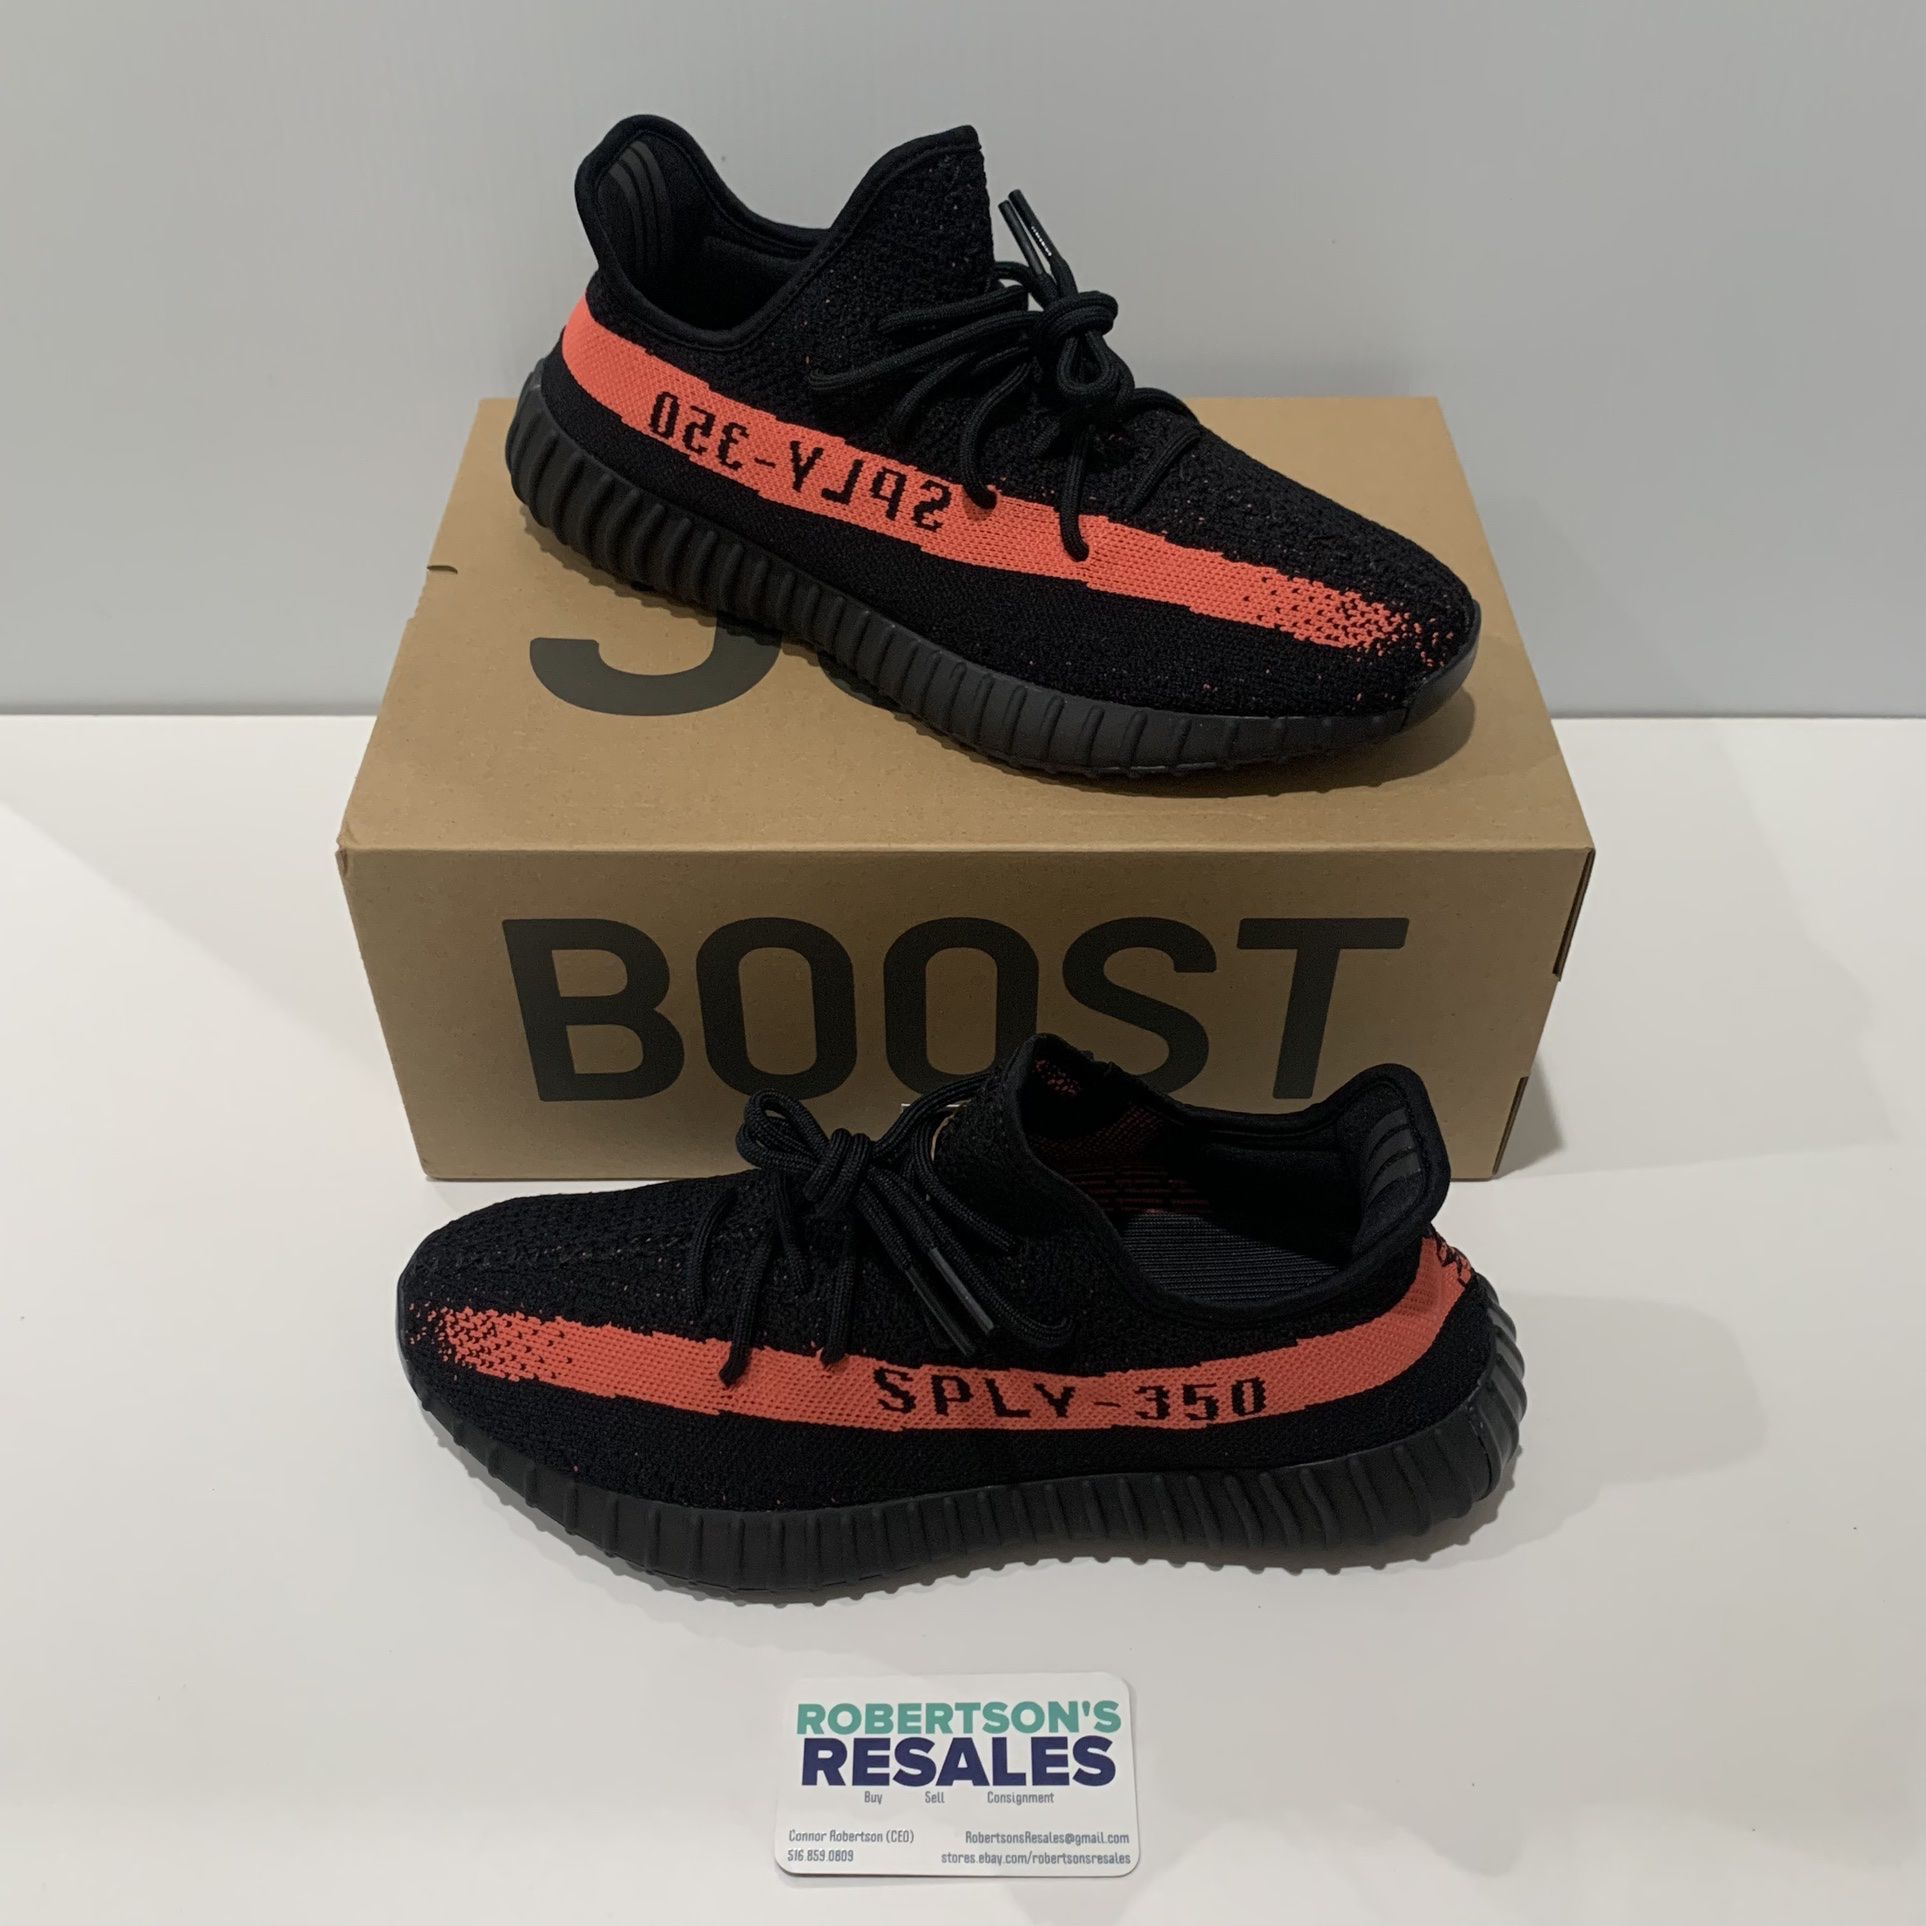 Supreme x adidas Yeezy Boost 350 V2 Red White F36923 Free Shipping